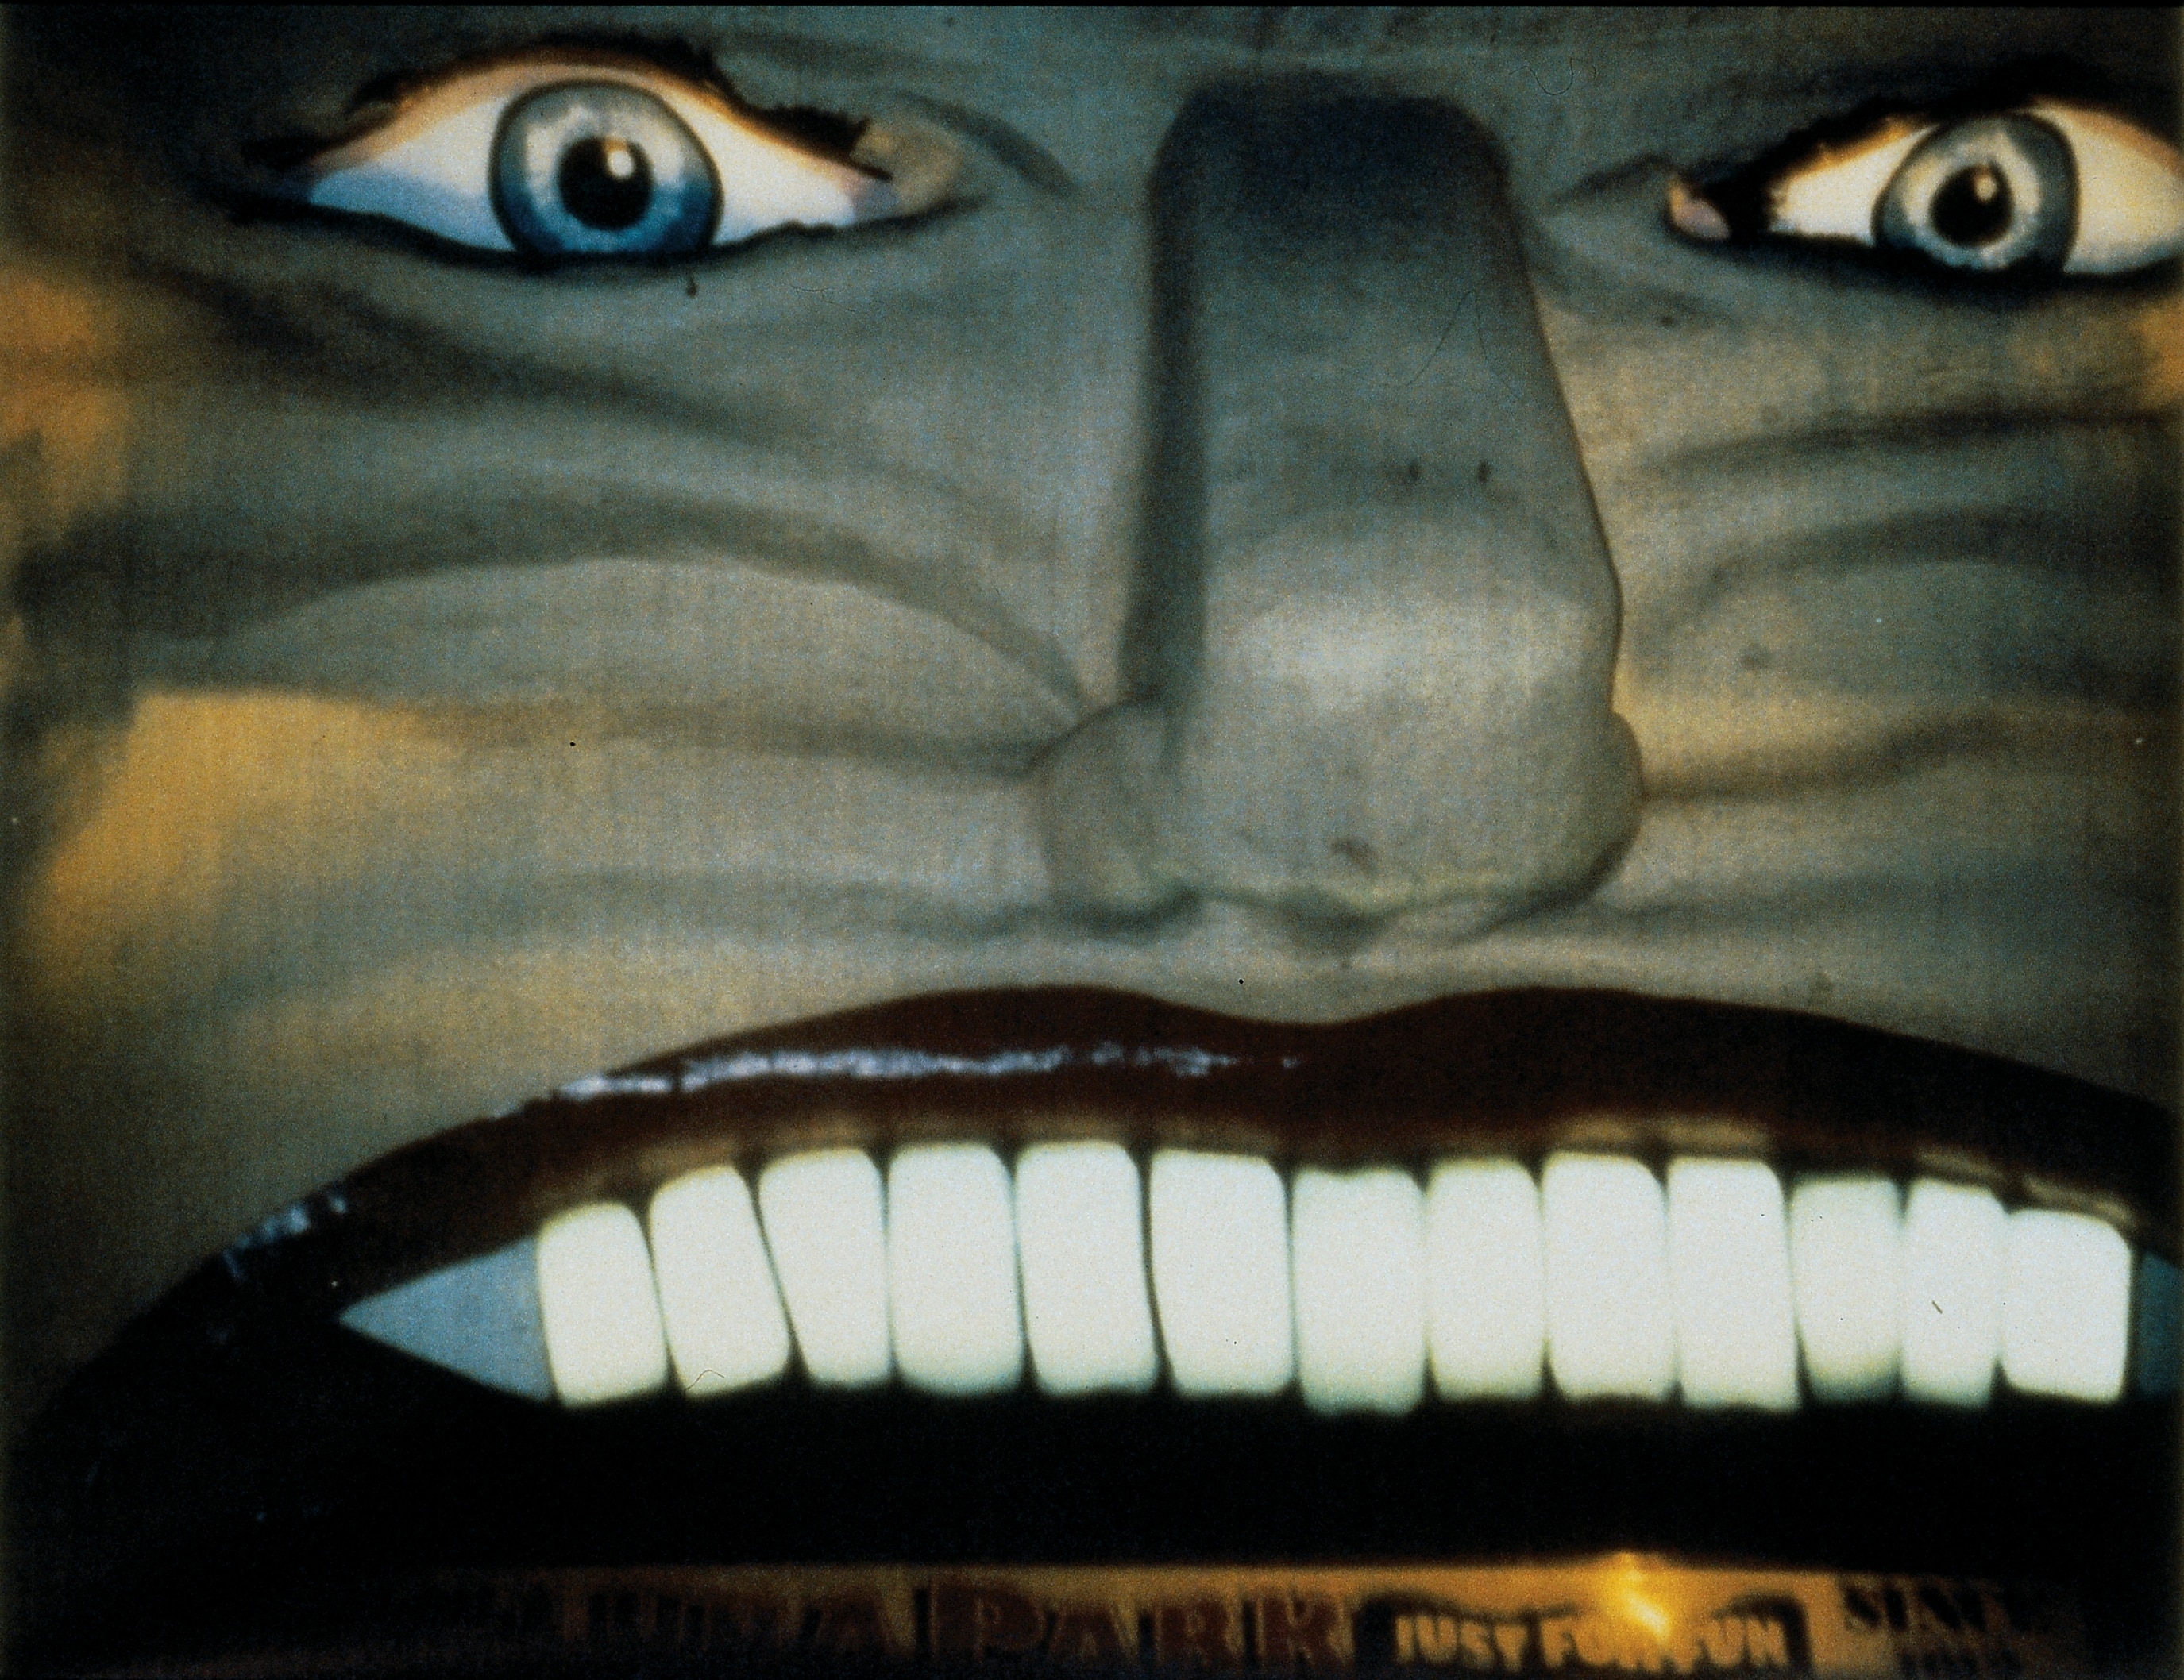 A 90s photograph of a sculpted face with white teeth, big eyes and nose, the old entrance to Melbourne's Luna Park